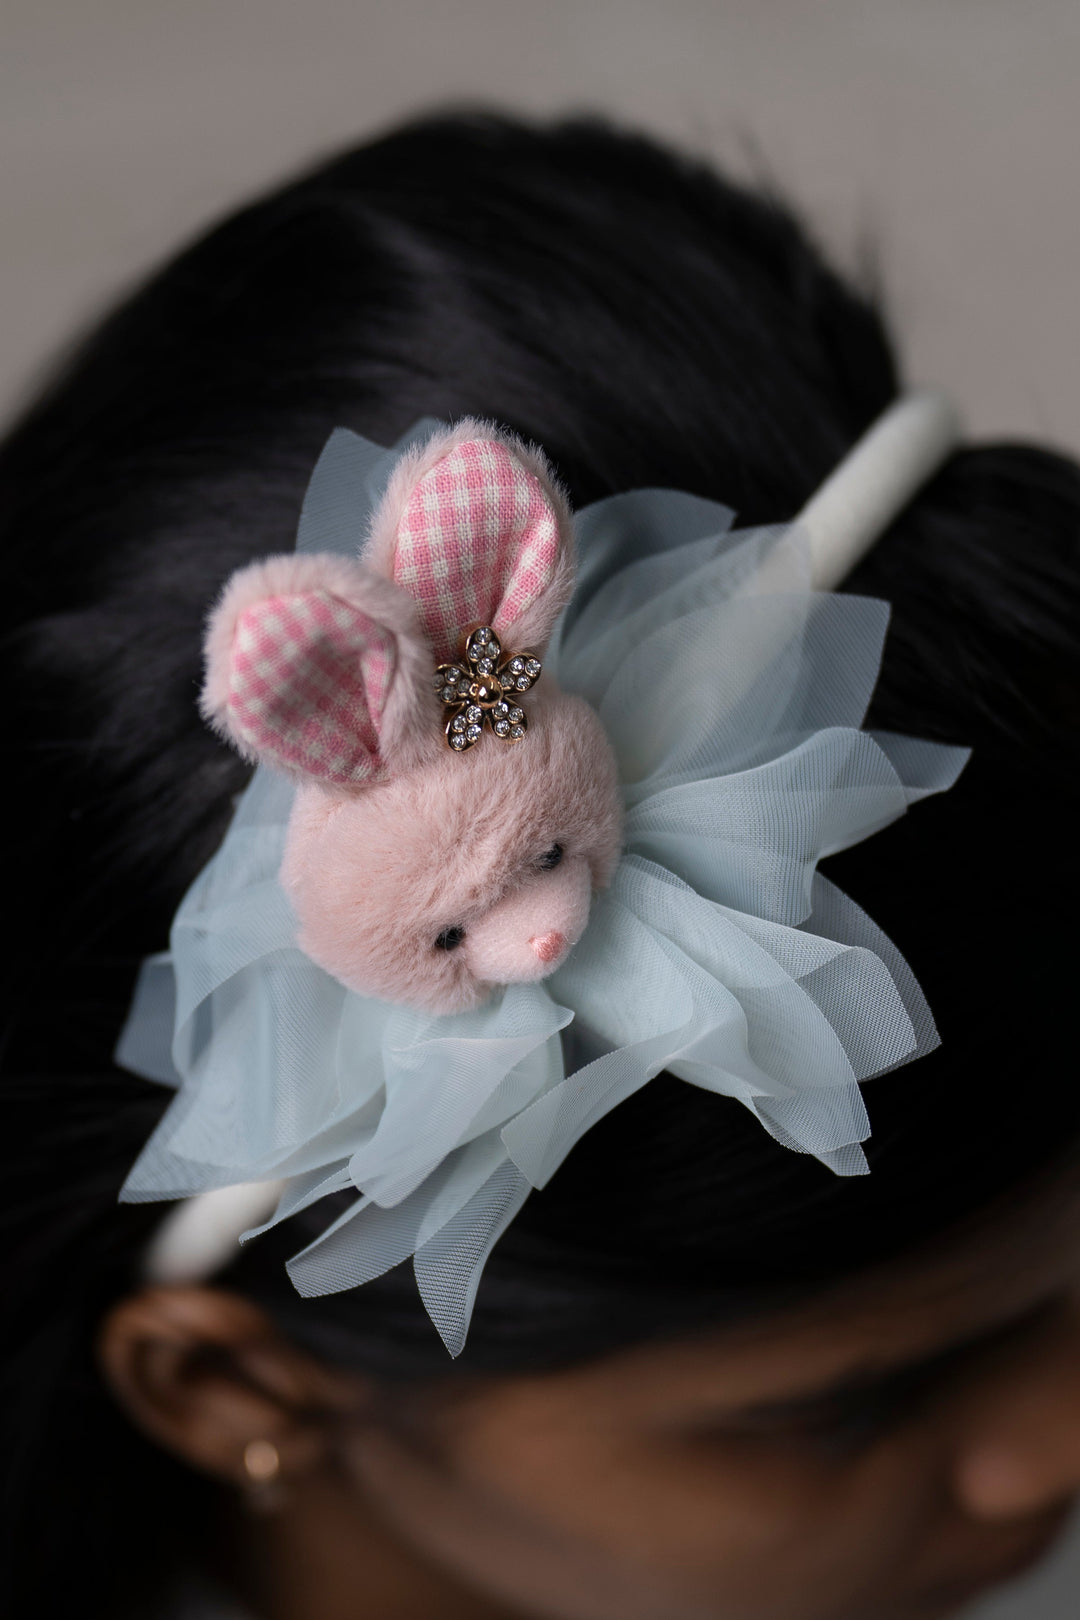 The Nesavu Hair Band Whimsical Plush Bunny Hairbow with Tulle and Sparkling Accents Nesavu Blue JHB80A Cute Bunny Hairbow with Blue Tulle | Adorable Hair Accessory for Kids | The Nesavu